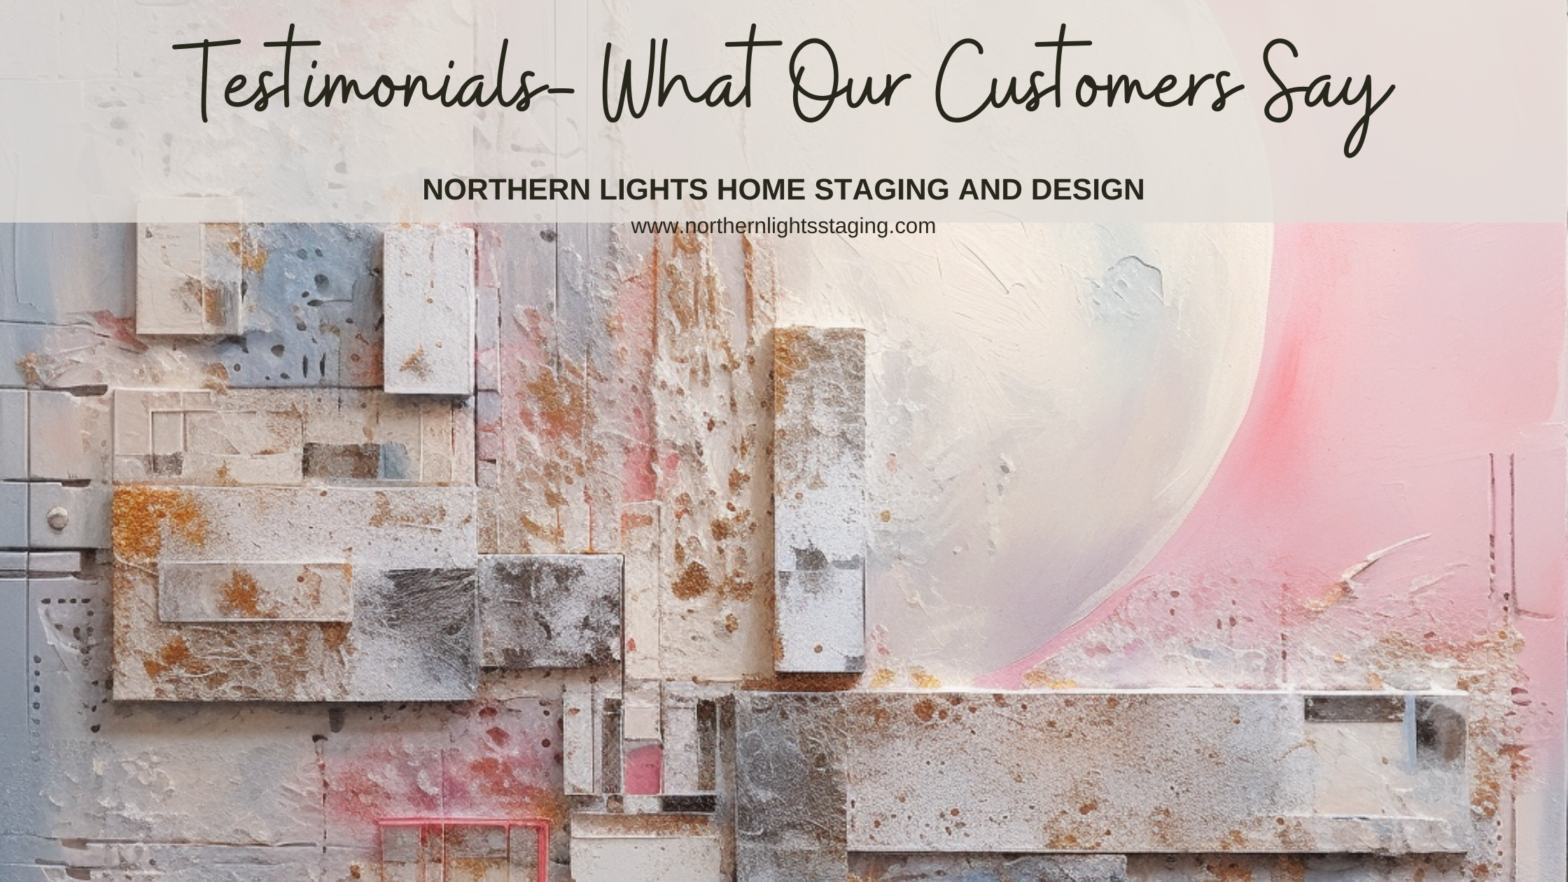 Testimonials- what our customers say- Northern Lights Home Staging and Design